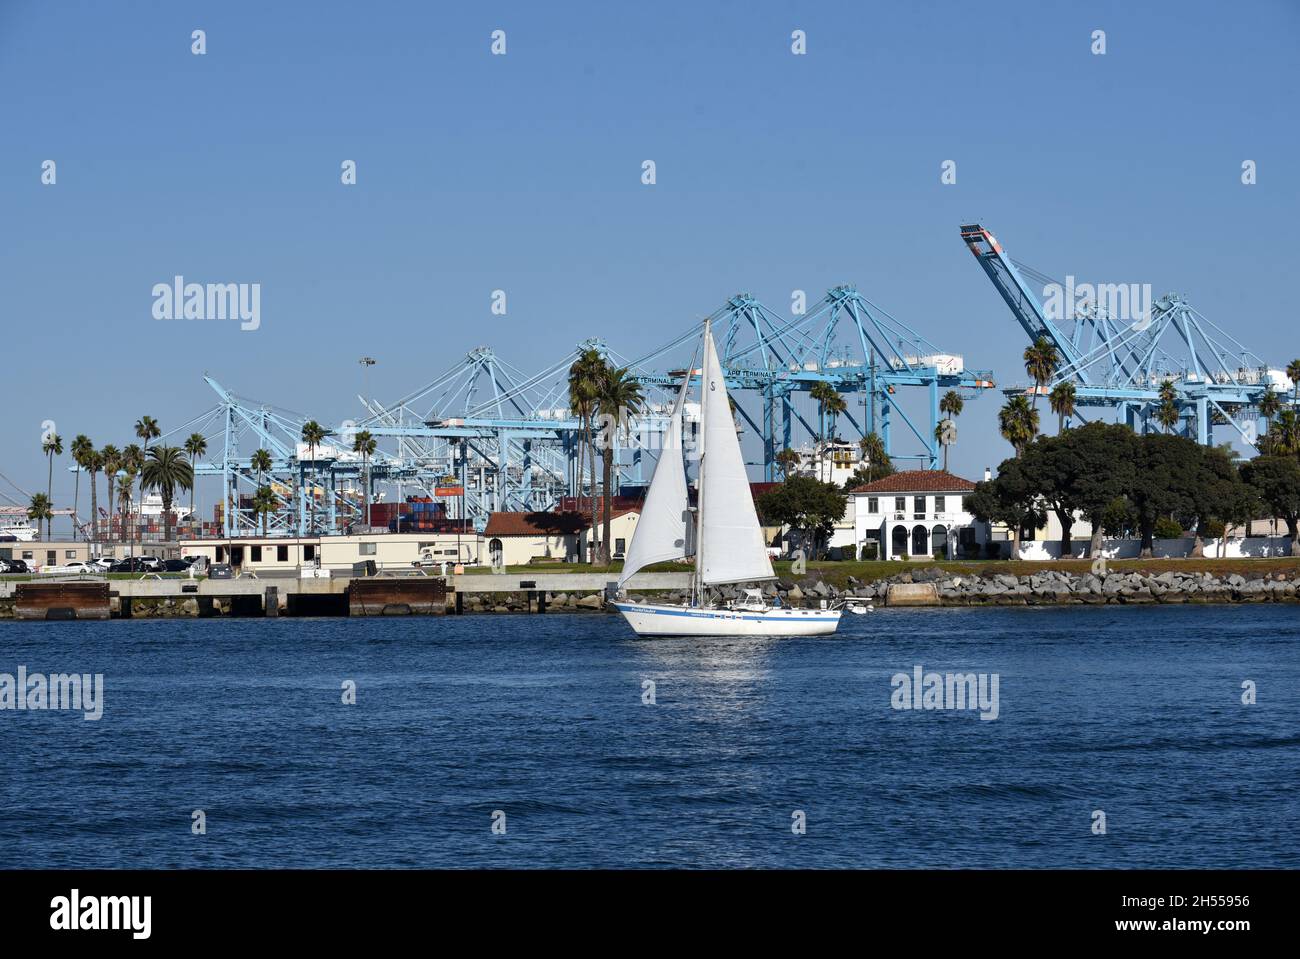 Los Angeles, CA USA - October 15, 2021: Sailboat passing the shipping containers and gantry cranes in the main channel of the Port of Los Angeles on a Stock Photo